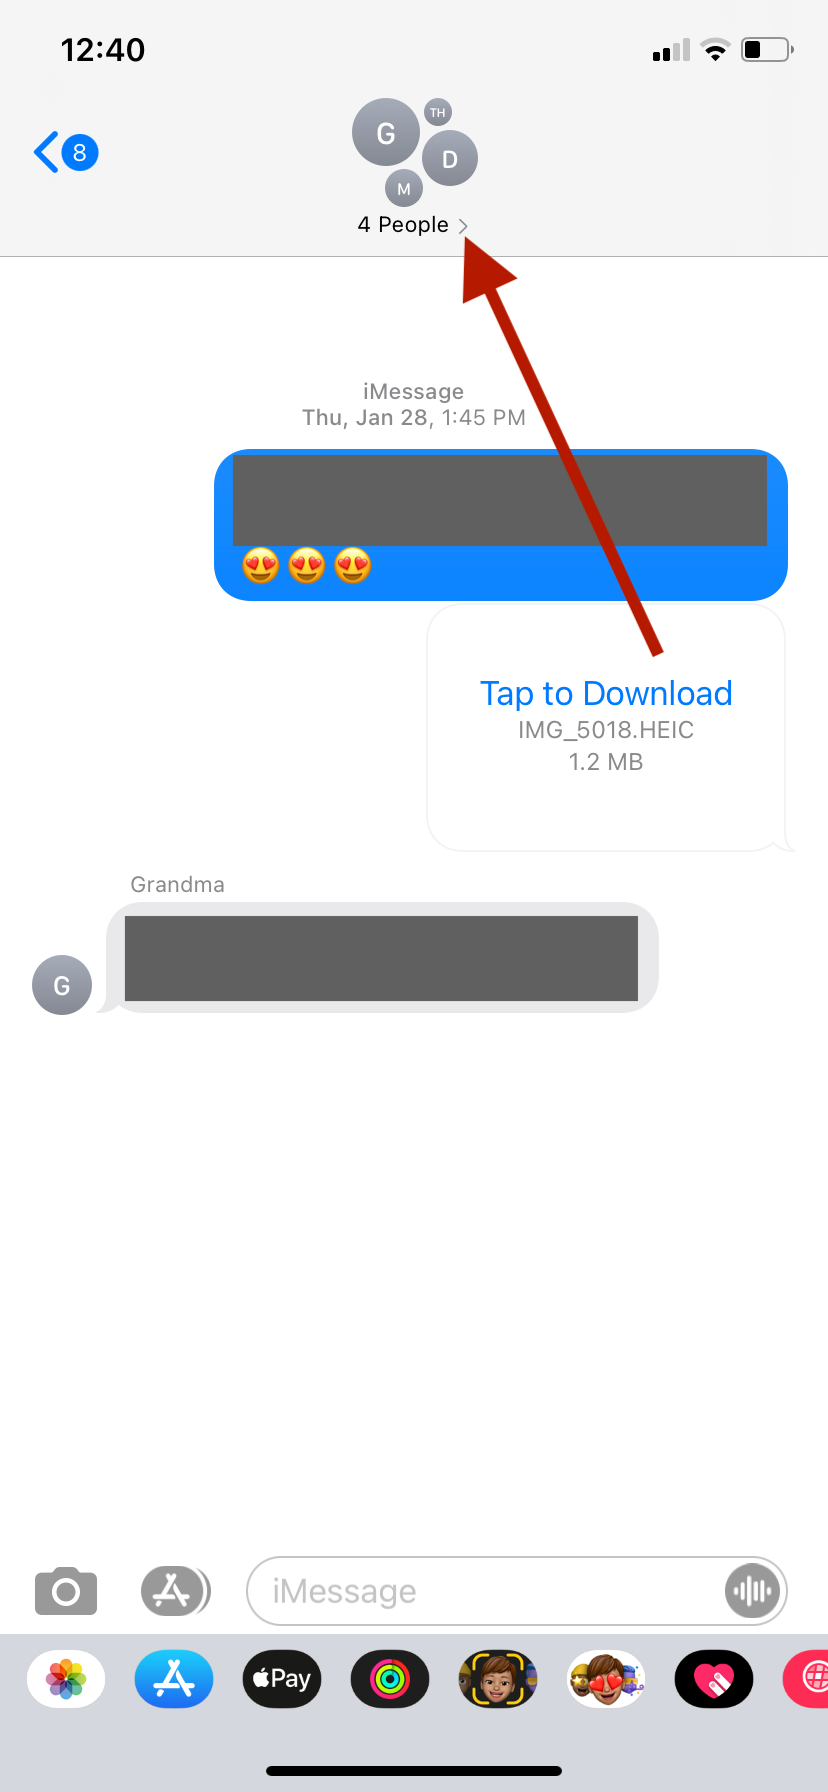 The window of an iMessage group chat on an iPhone. An arrow points to a menu arrow in the name section